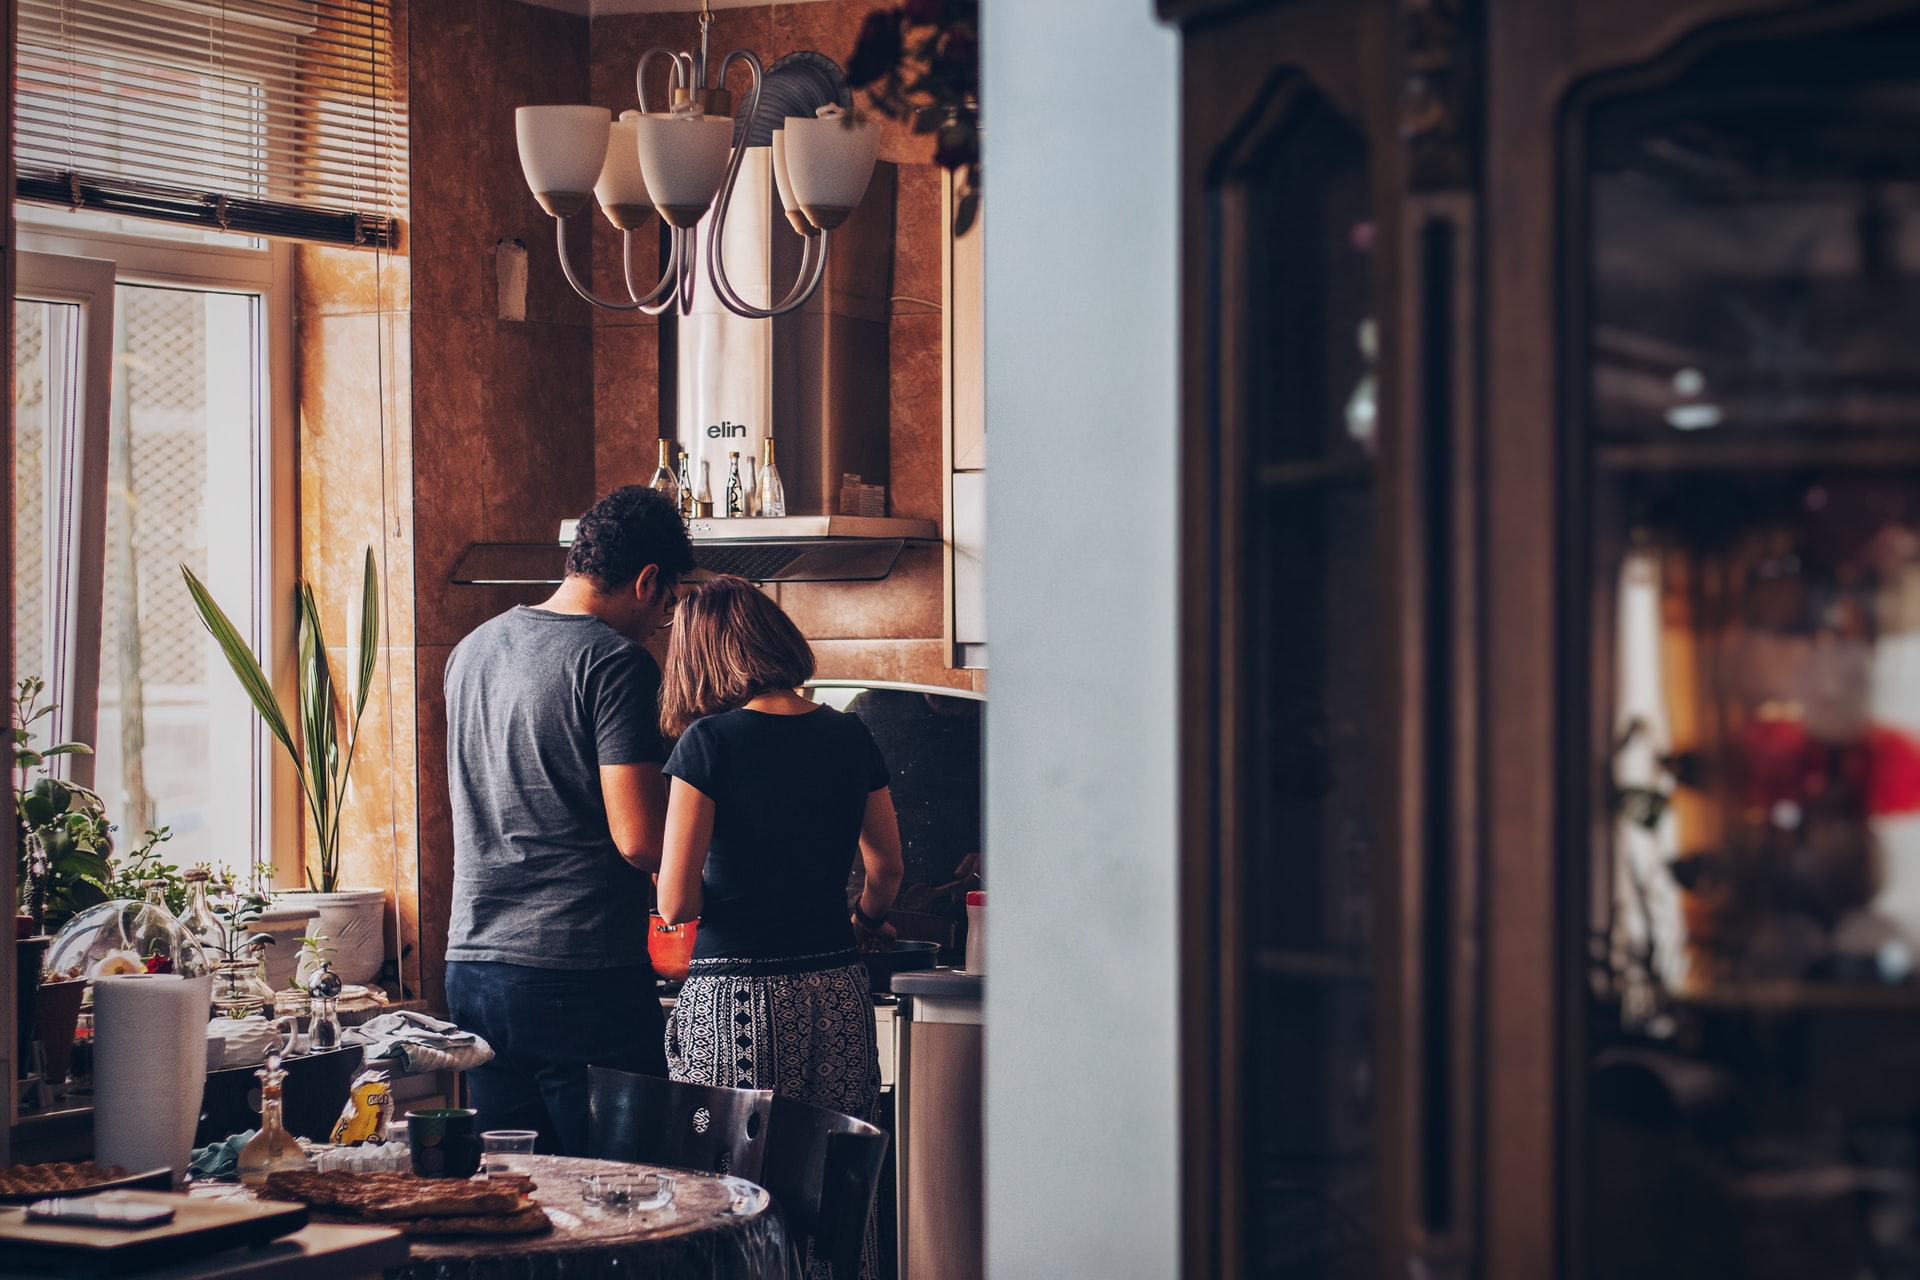 A couple cooking in the kitchen